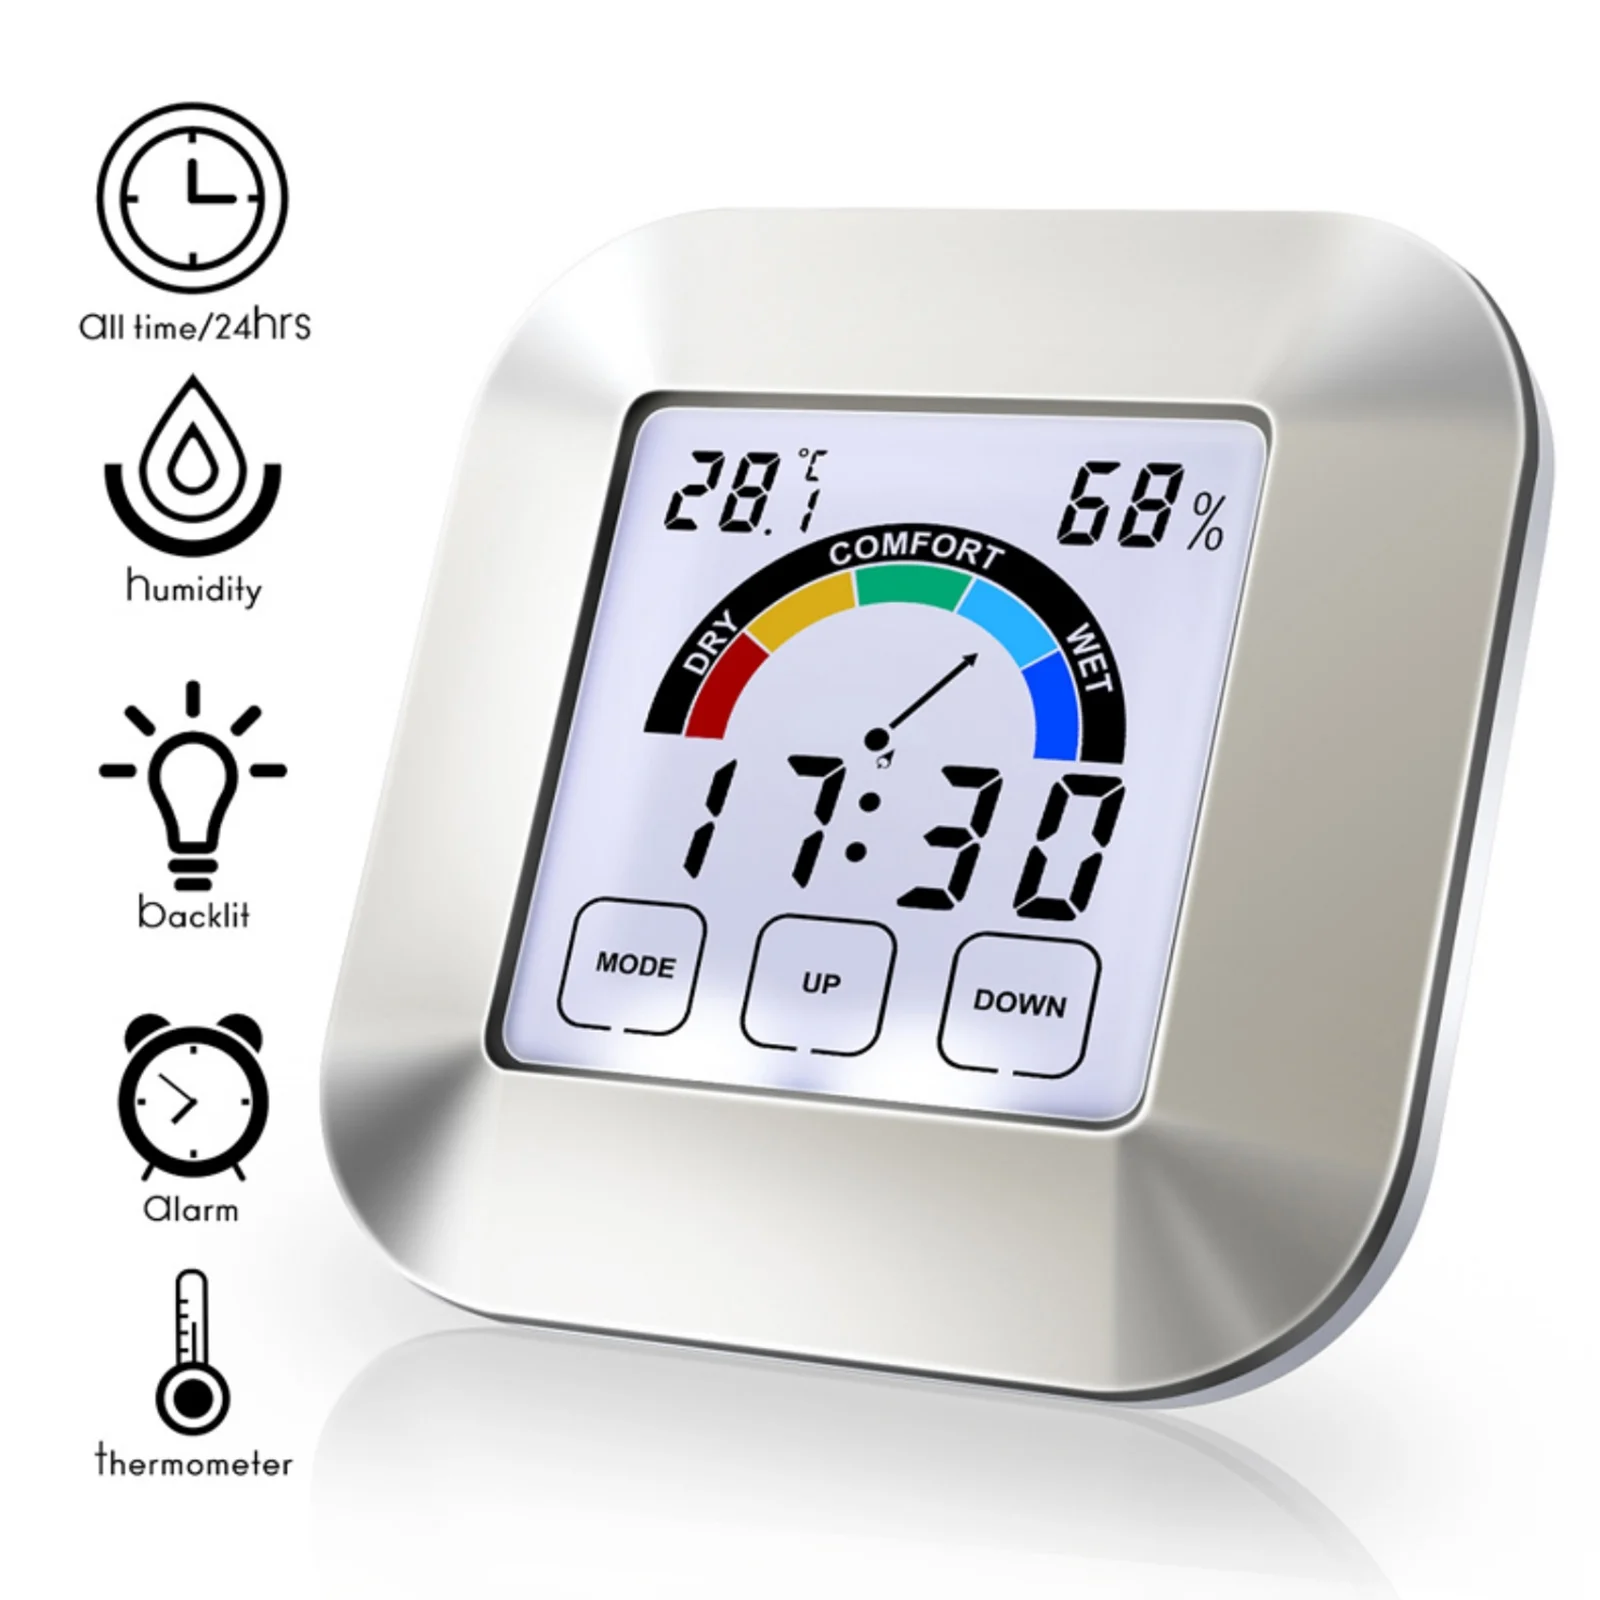 https://ae01.alicdn.com/kf/H4739b5a19c5f4ab584385b7b6ad555727/LCD-Digital-Thermometer-Hygrometer-Touch-Screen-Humidity-Meter-Thermometer-Hygrometer-Indoor-Weather-Station-Clock.jpg